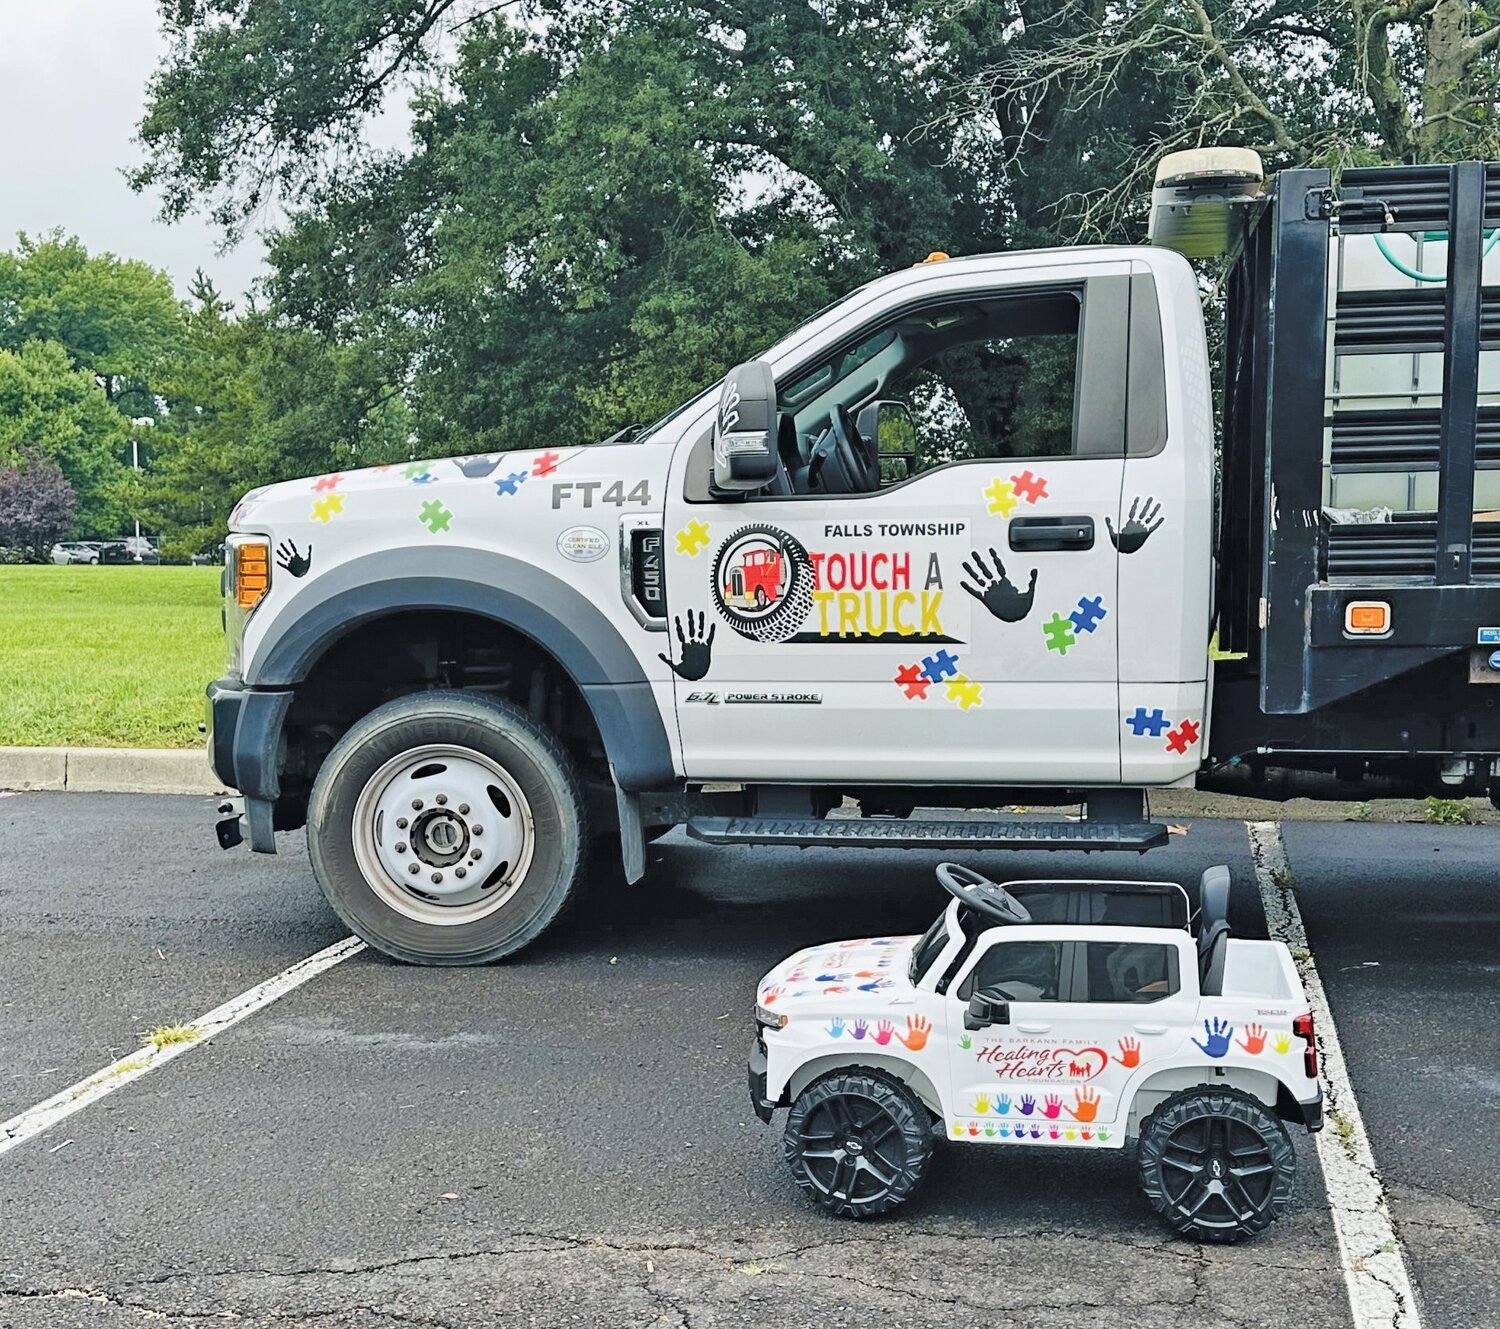 Falls Township’s Public Works Department purchased and outfitted a kid-sized ride-on truck to be raffled off during the township’s joint Touch a Truck and Family Festival. Raffle entries will be offered free of charge.